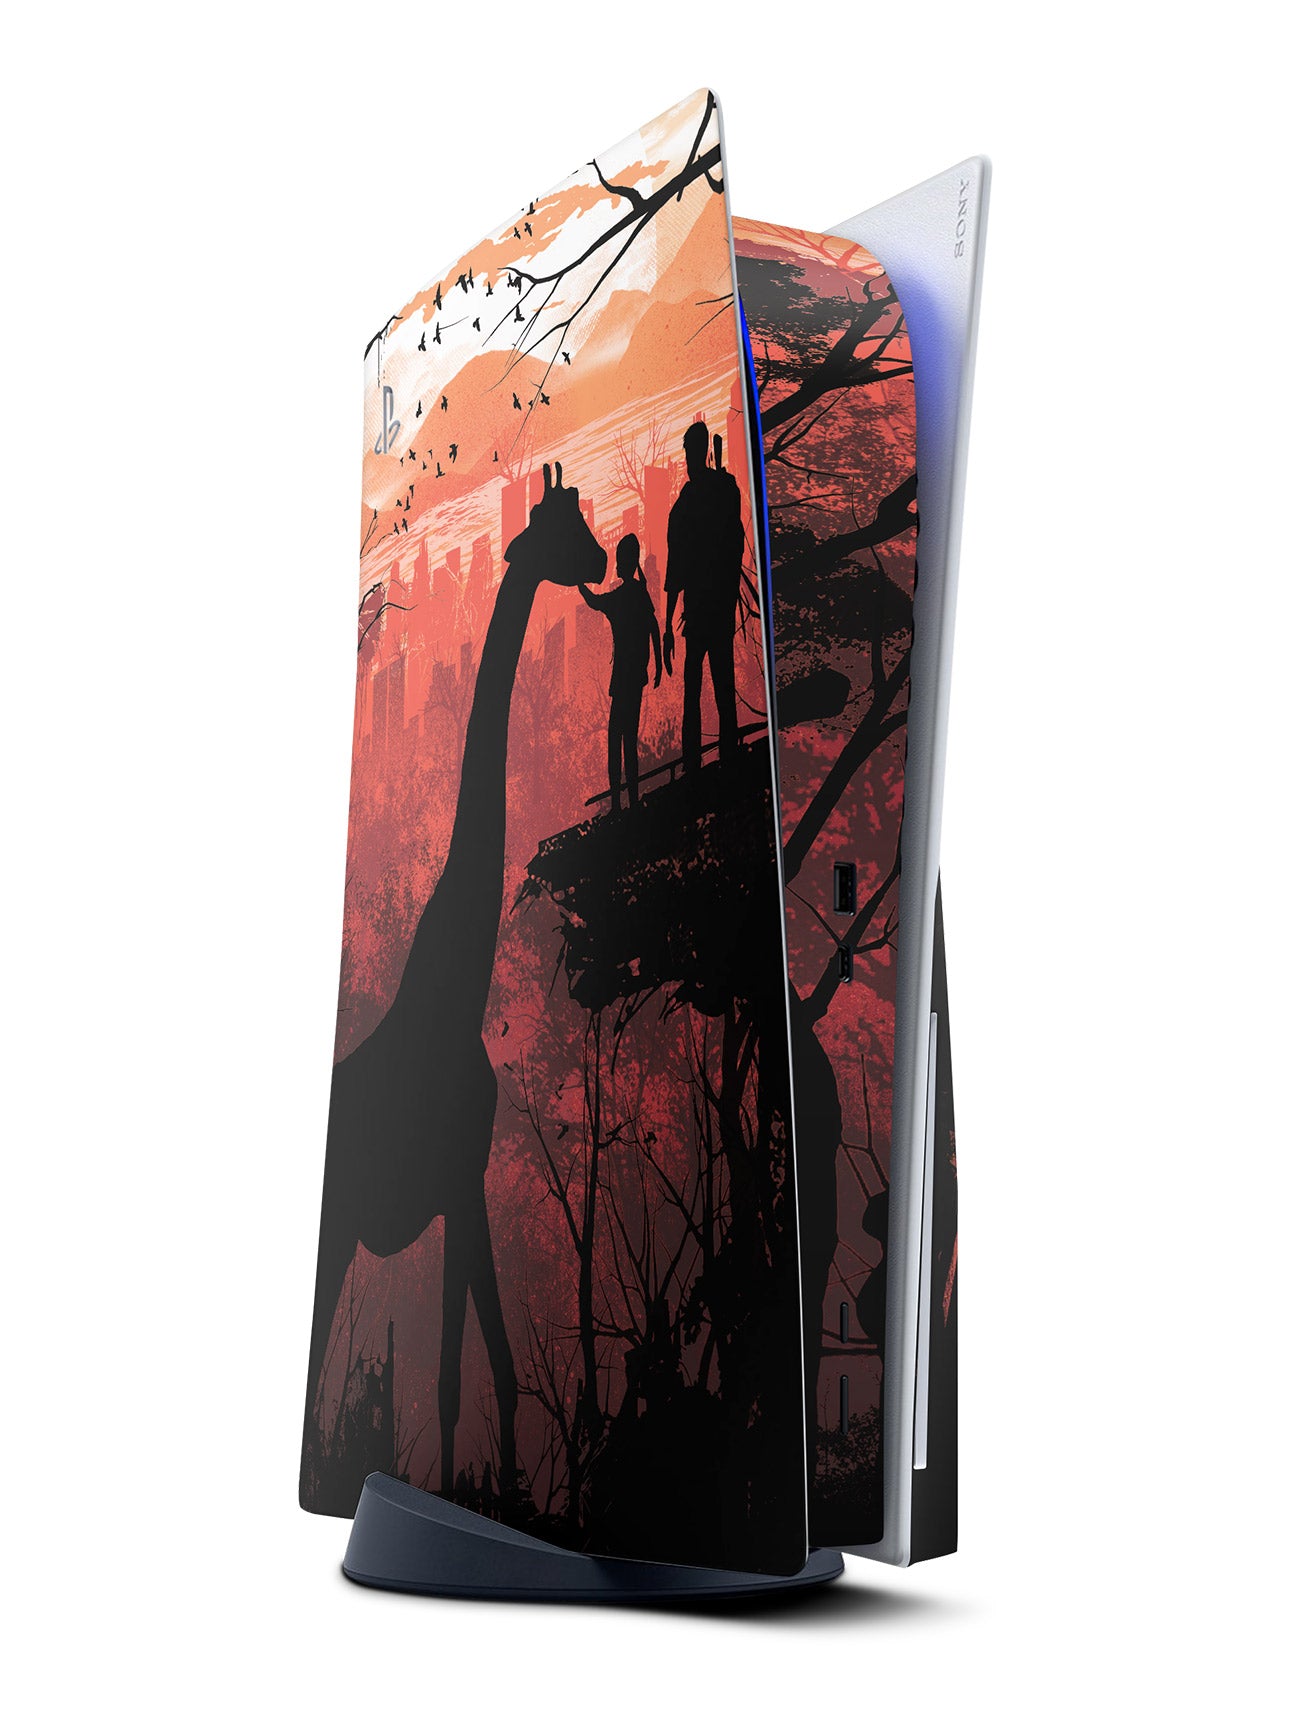 Ellie and Joel - The Last of Us PS5 Vinyl Console Skin Sticker Wrap – VGF  Gamers